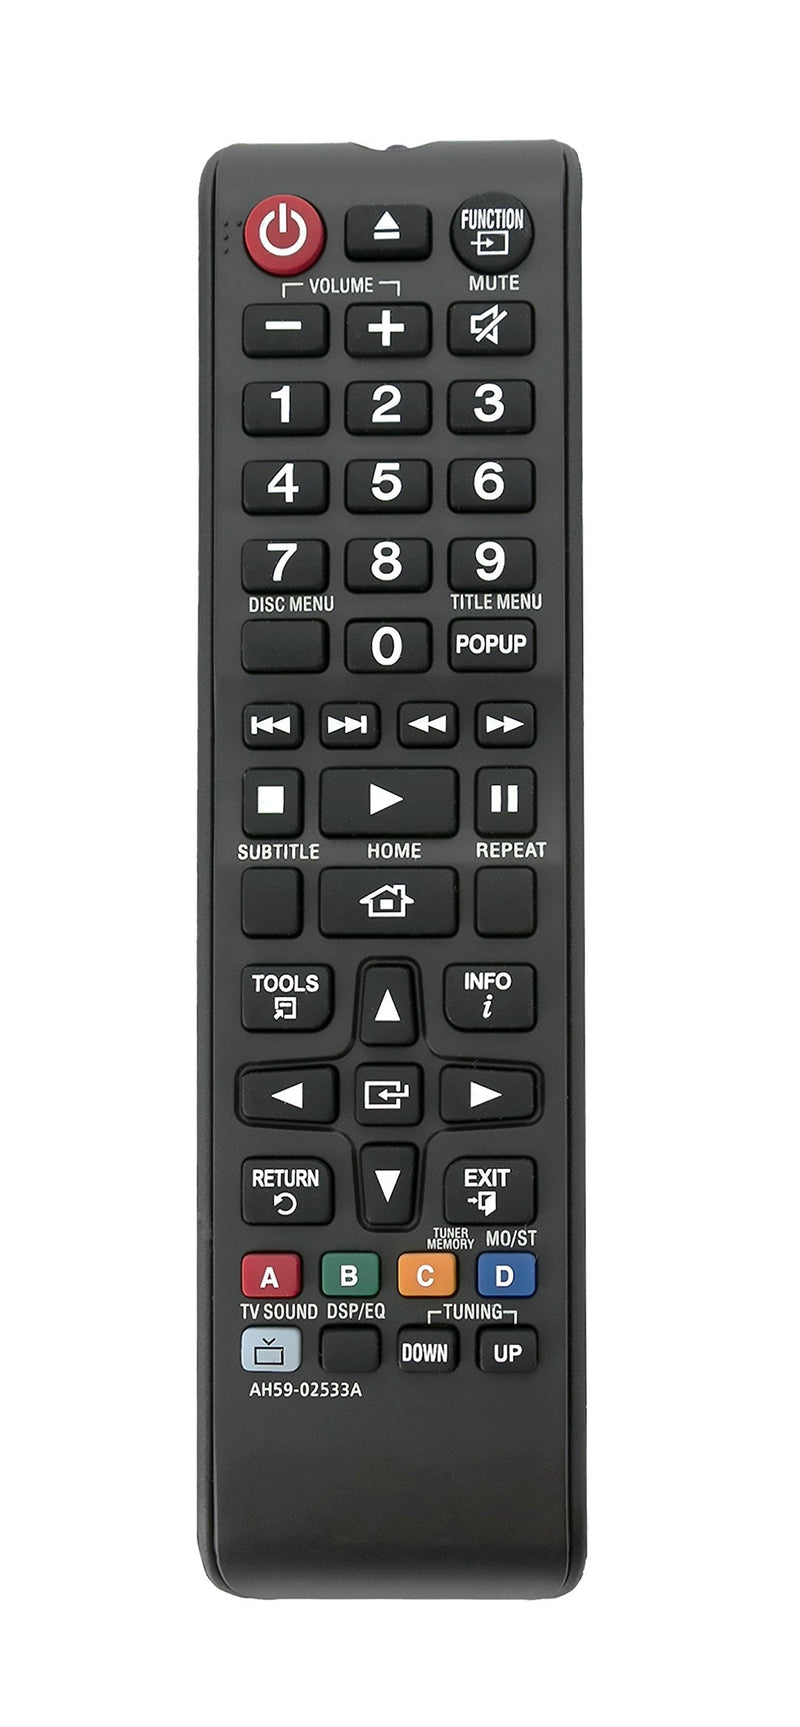 New AH59-02533A Replace Remote fit for Samsung HT-H4530 HT-H5500W-ZA HT-H5530 HT-F4500 HT-H4500 HT-H5500W HT-J4100 HT-J4500 HT-J5500W HT-JM41 HT-J5500/2A Home Theater System - LeoForward Australia